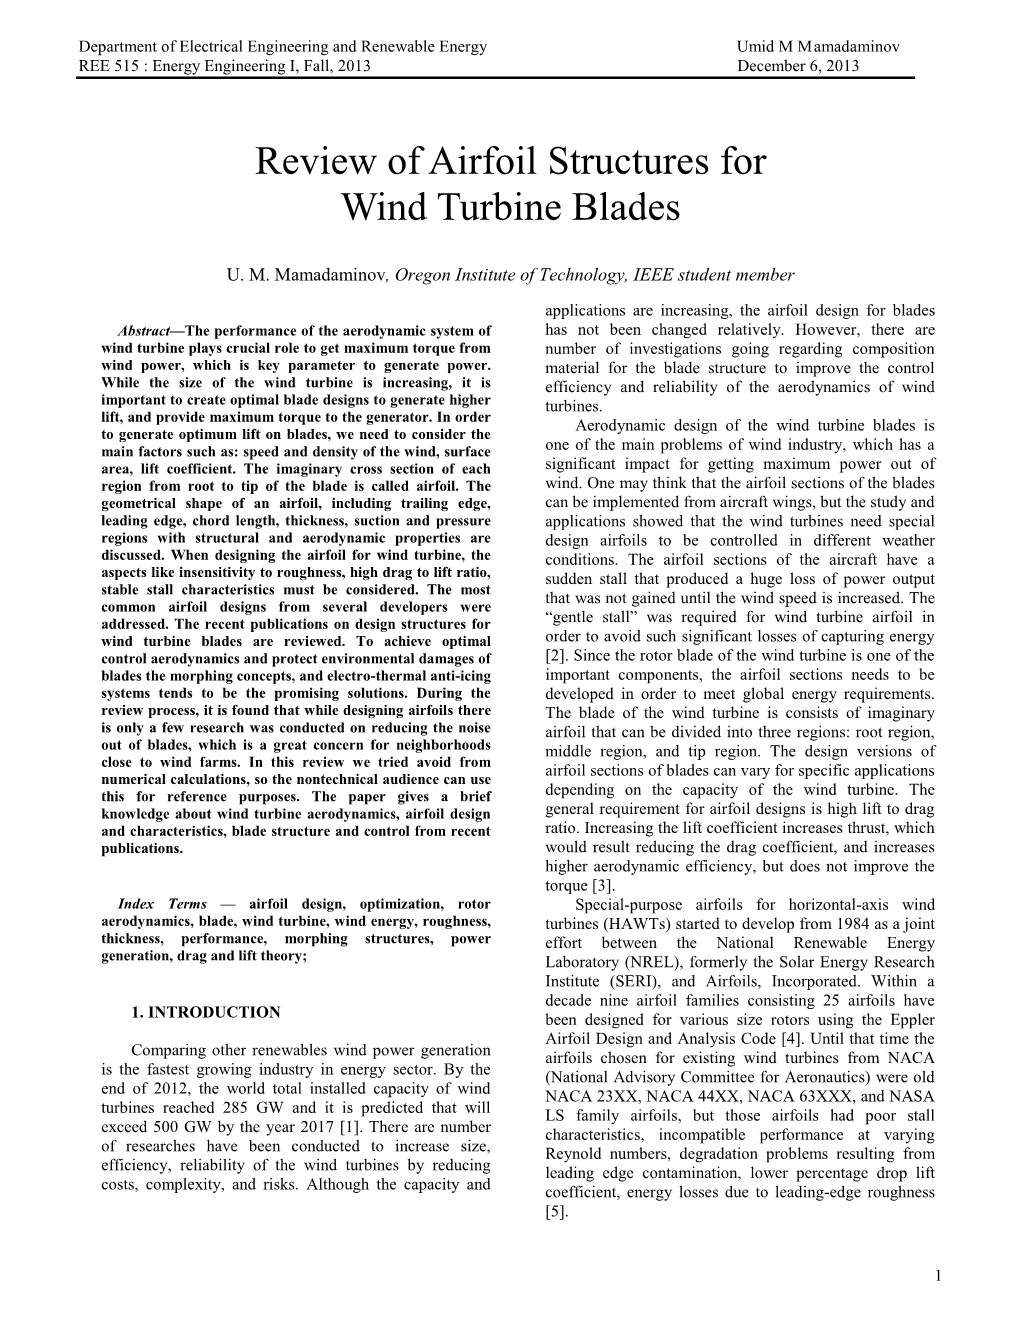 Review of Airfoil Structures for Wind Turbine Blades